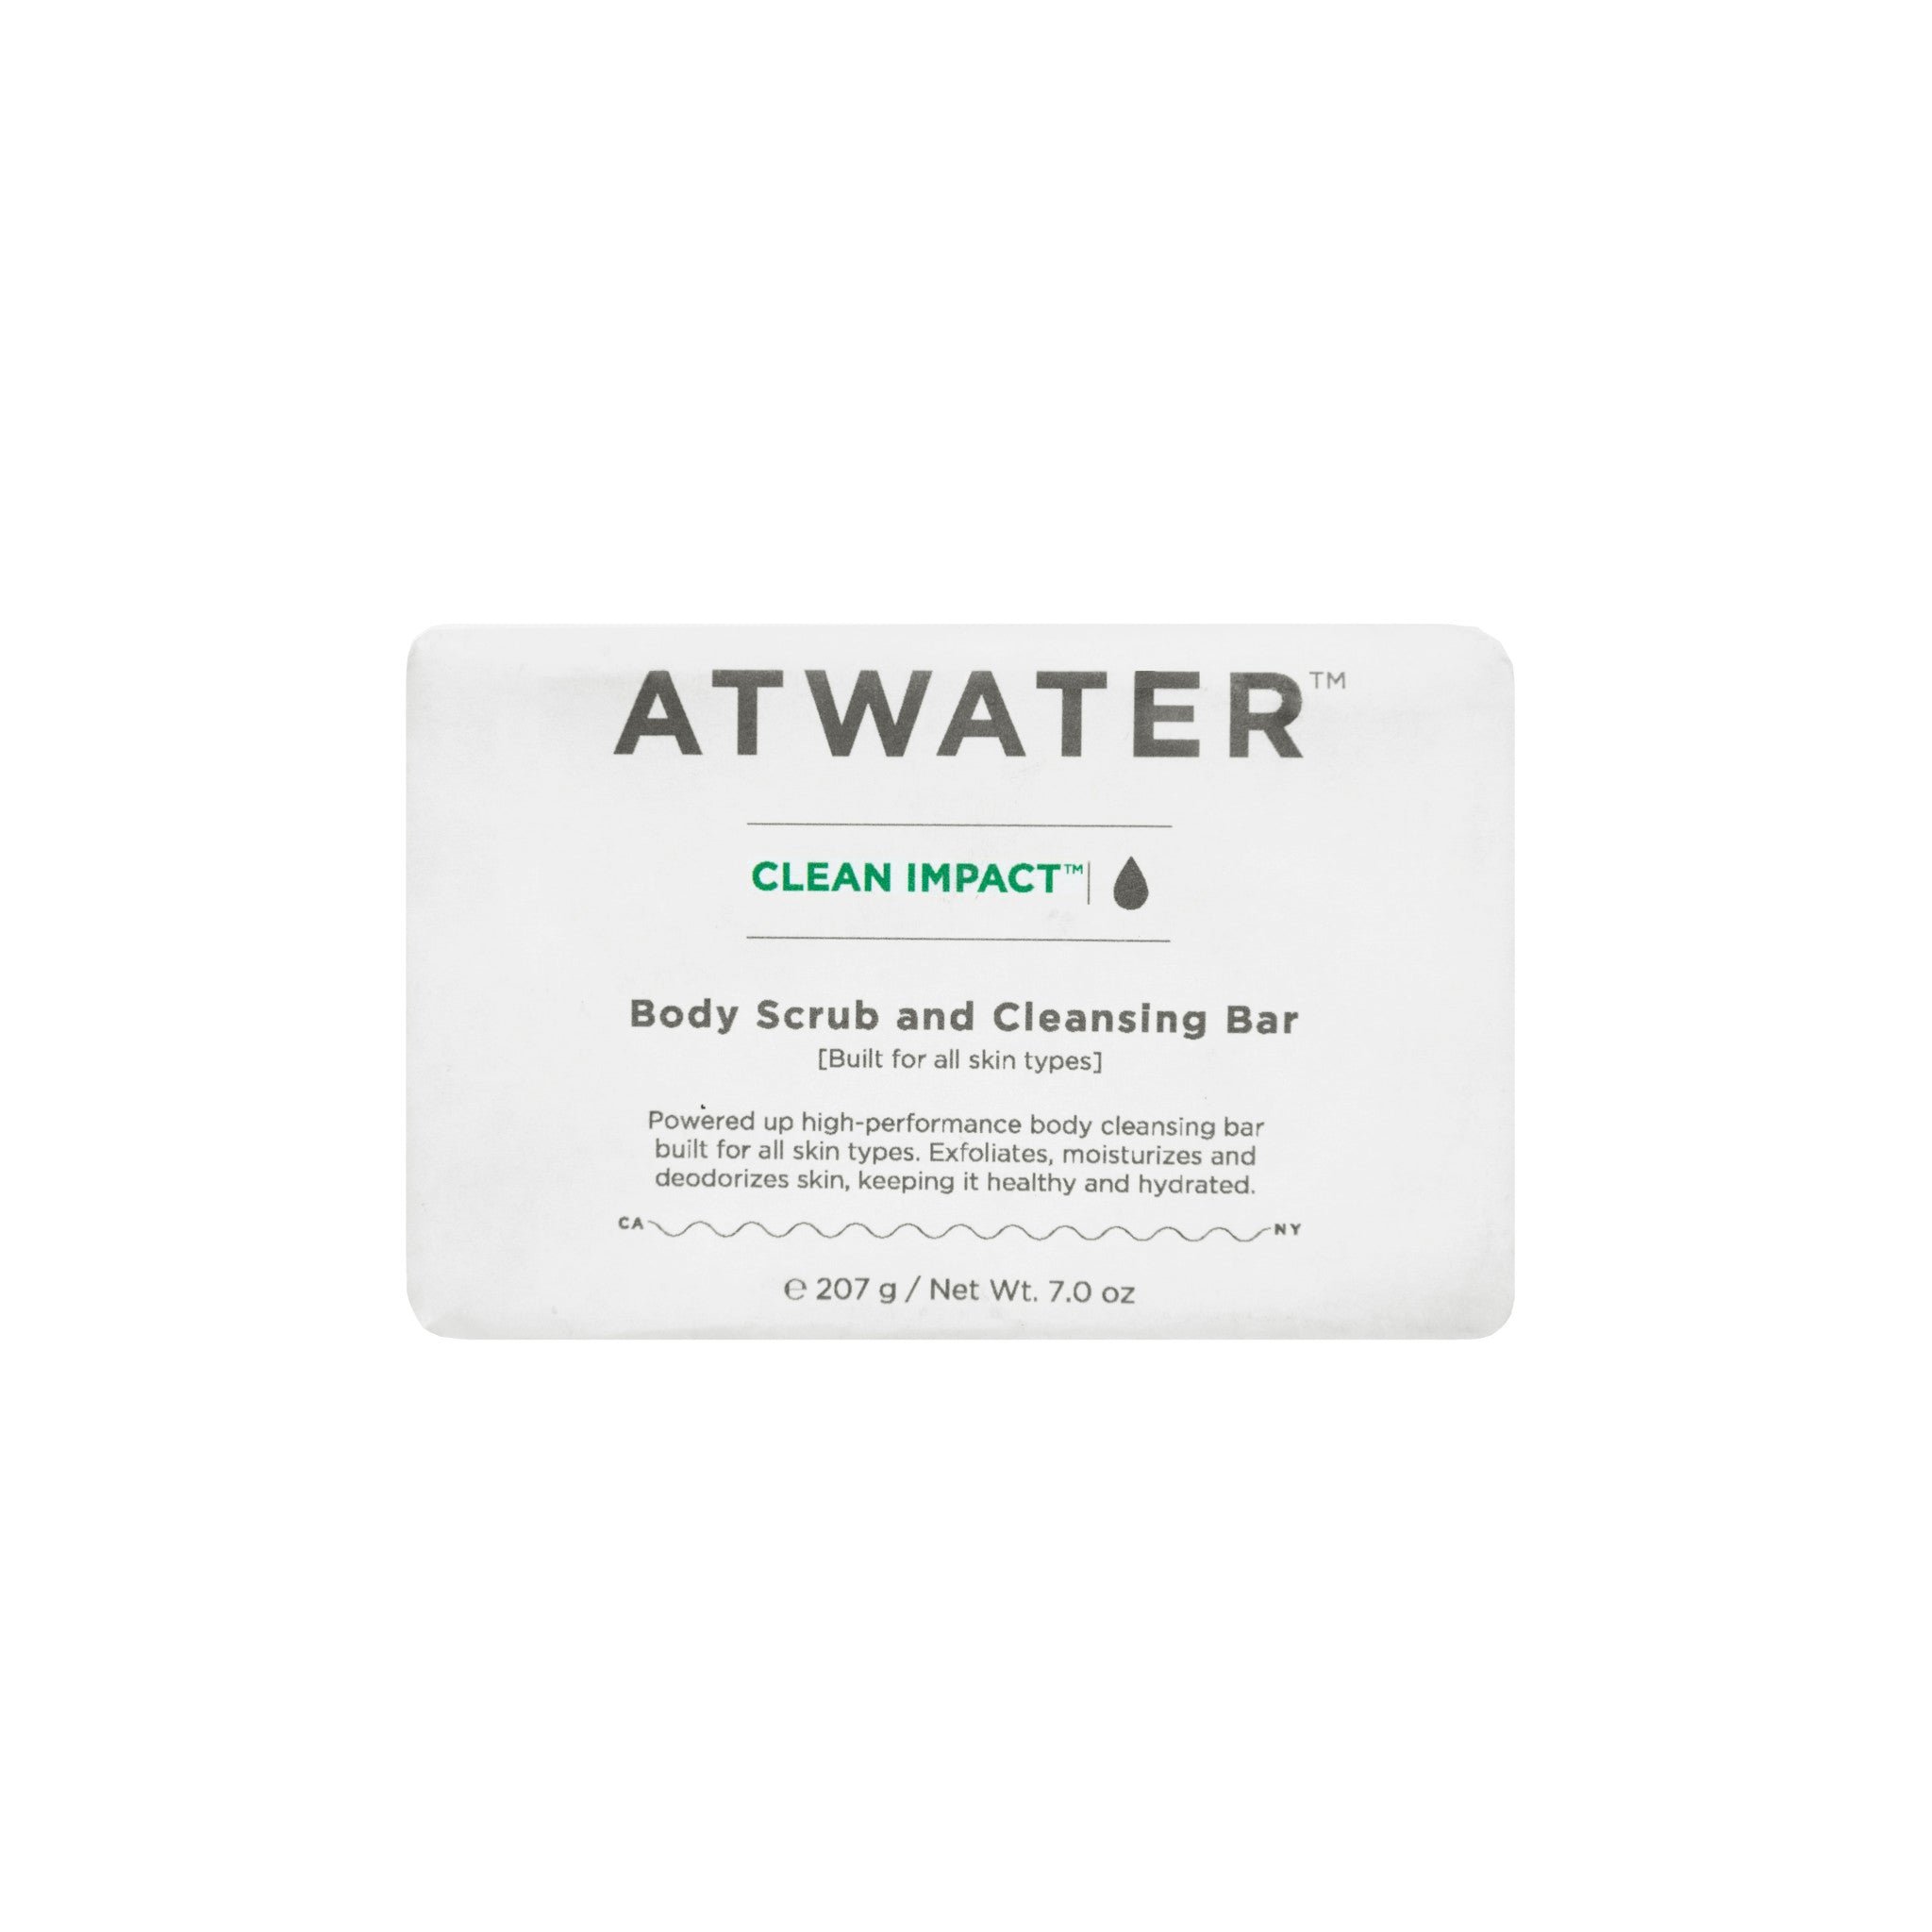 Atwater Clean Impact Body Scrub and Cleansing Bar main image.